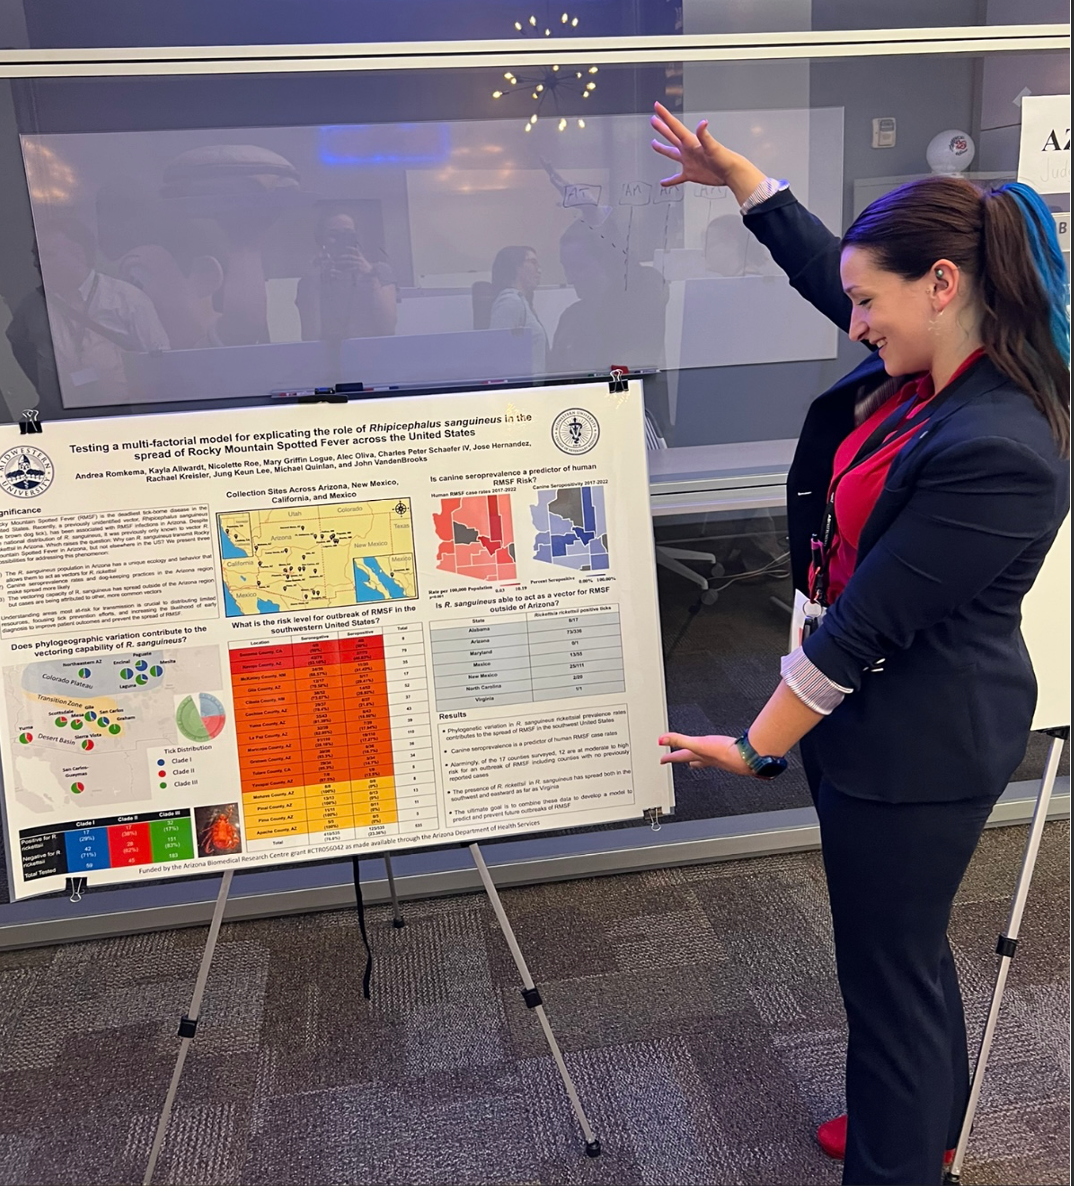 Woman showing research poster at academic conference 